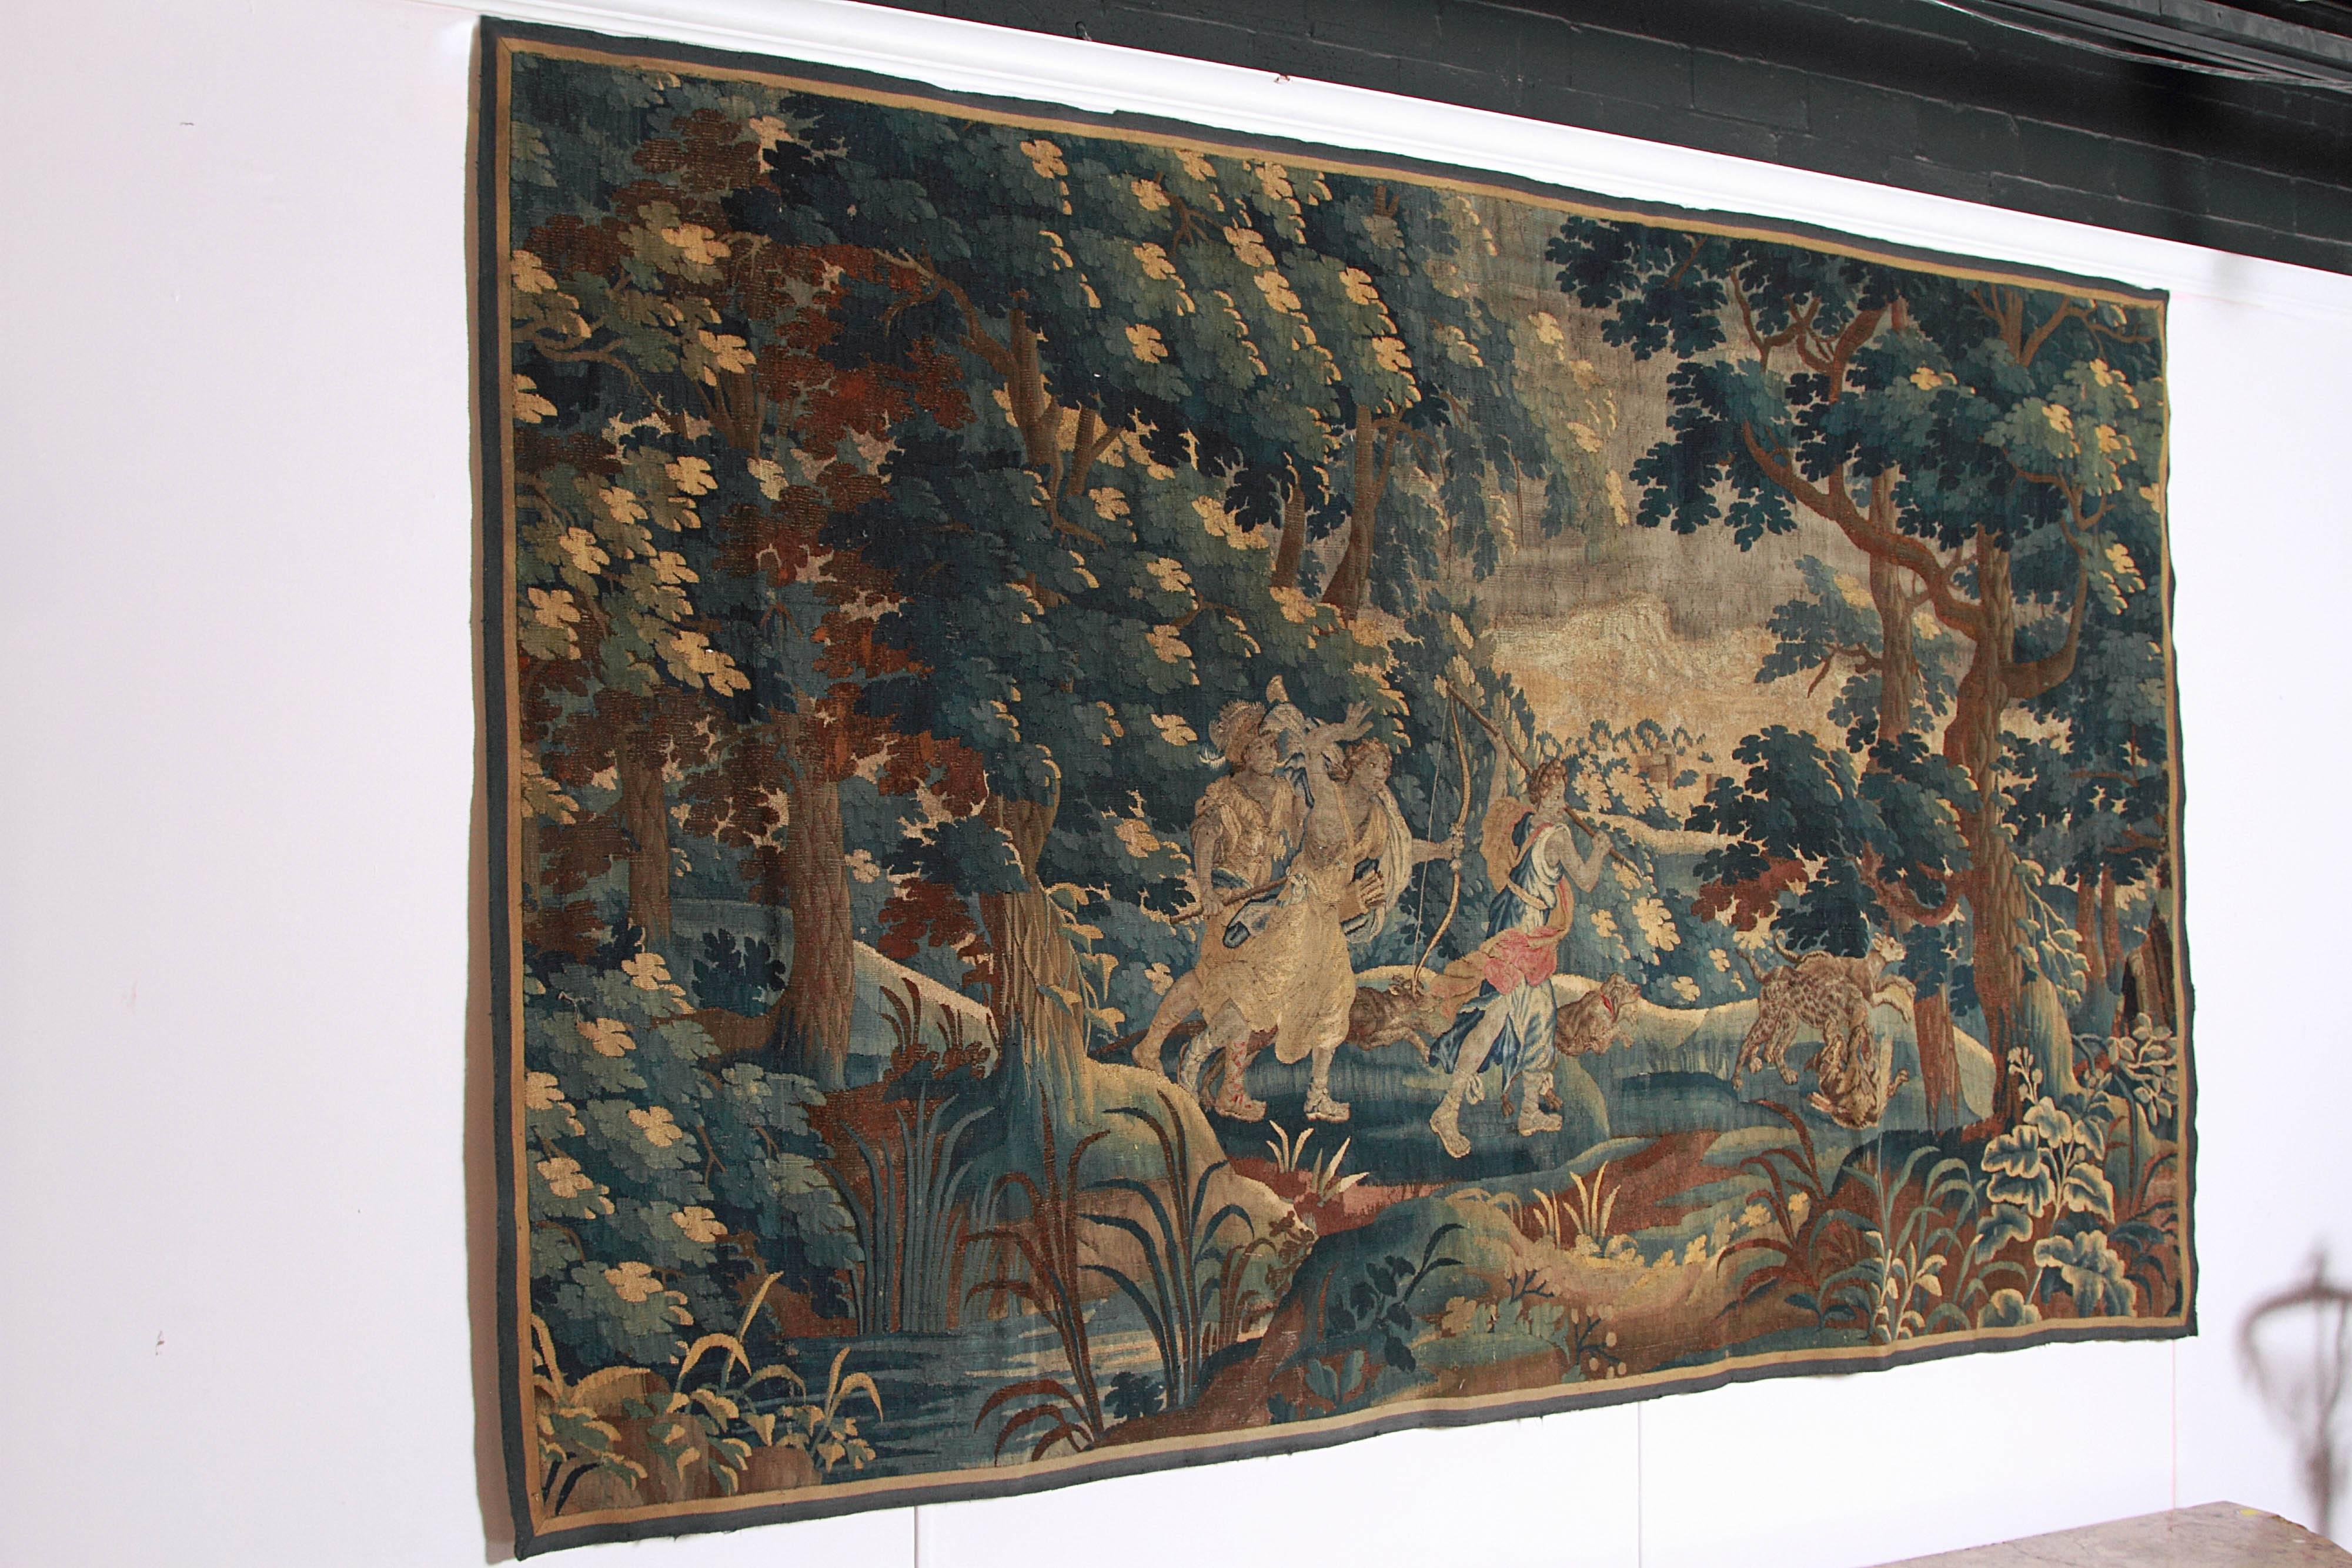 This superb wool and silk Aubusson tapestry depicts Diana the Huntress with two attendants on a wolf hunt in a forest. One attendant is a falconer holding his falcon and the other holds a spear. There are hunting dogs at the center, one of which has